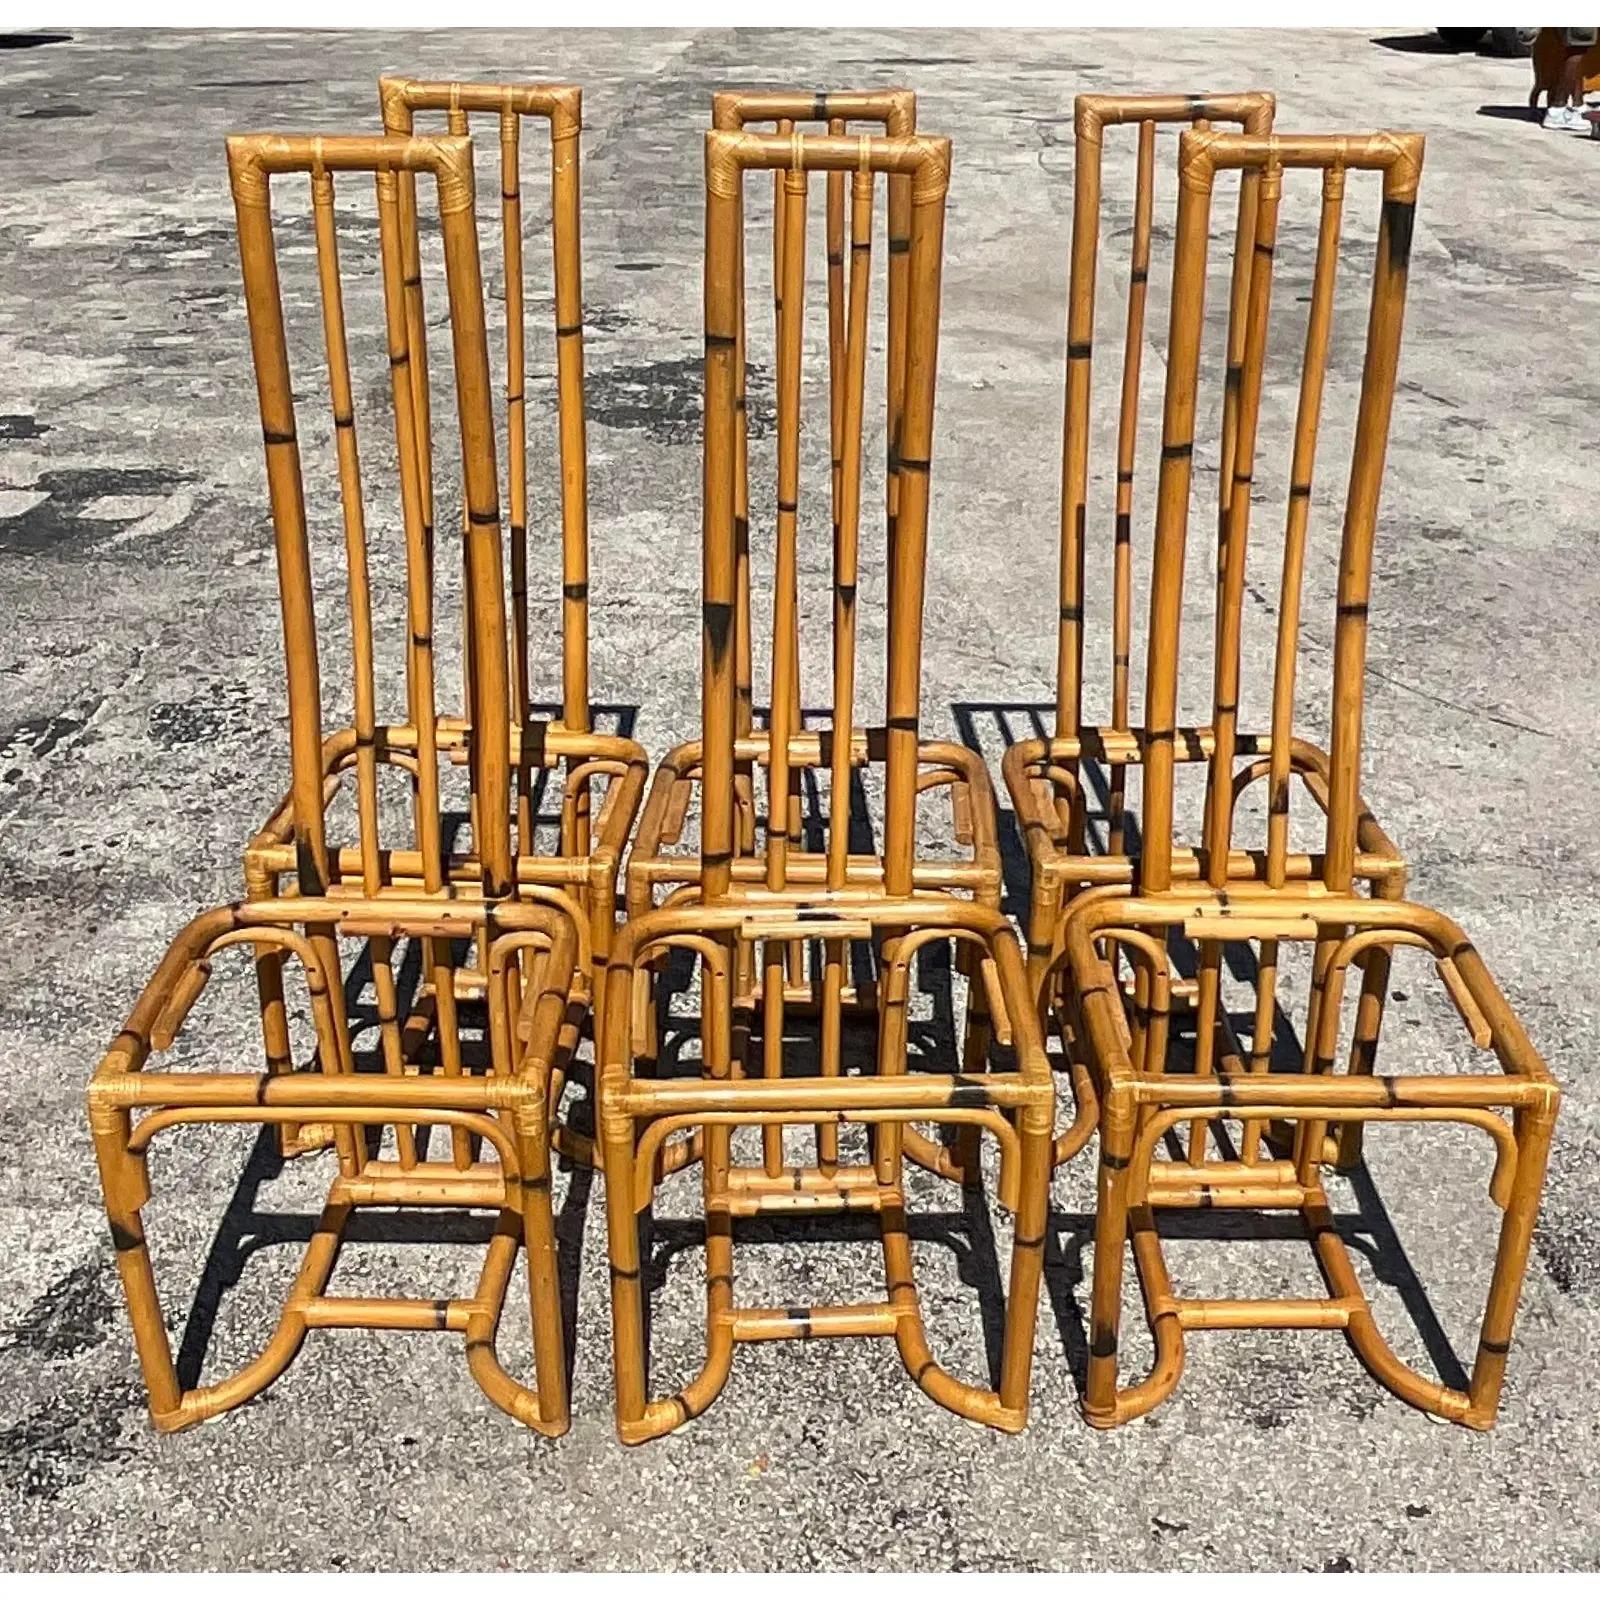 A fabulous set of six vintage Coastal dining chairs. Beautiful bent bamboo in a chic high back design. Slender and styling and a great addition to any décor. I have all the seats and they will be included. Acquired from a Palm Beach estate.

The